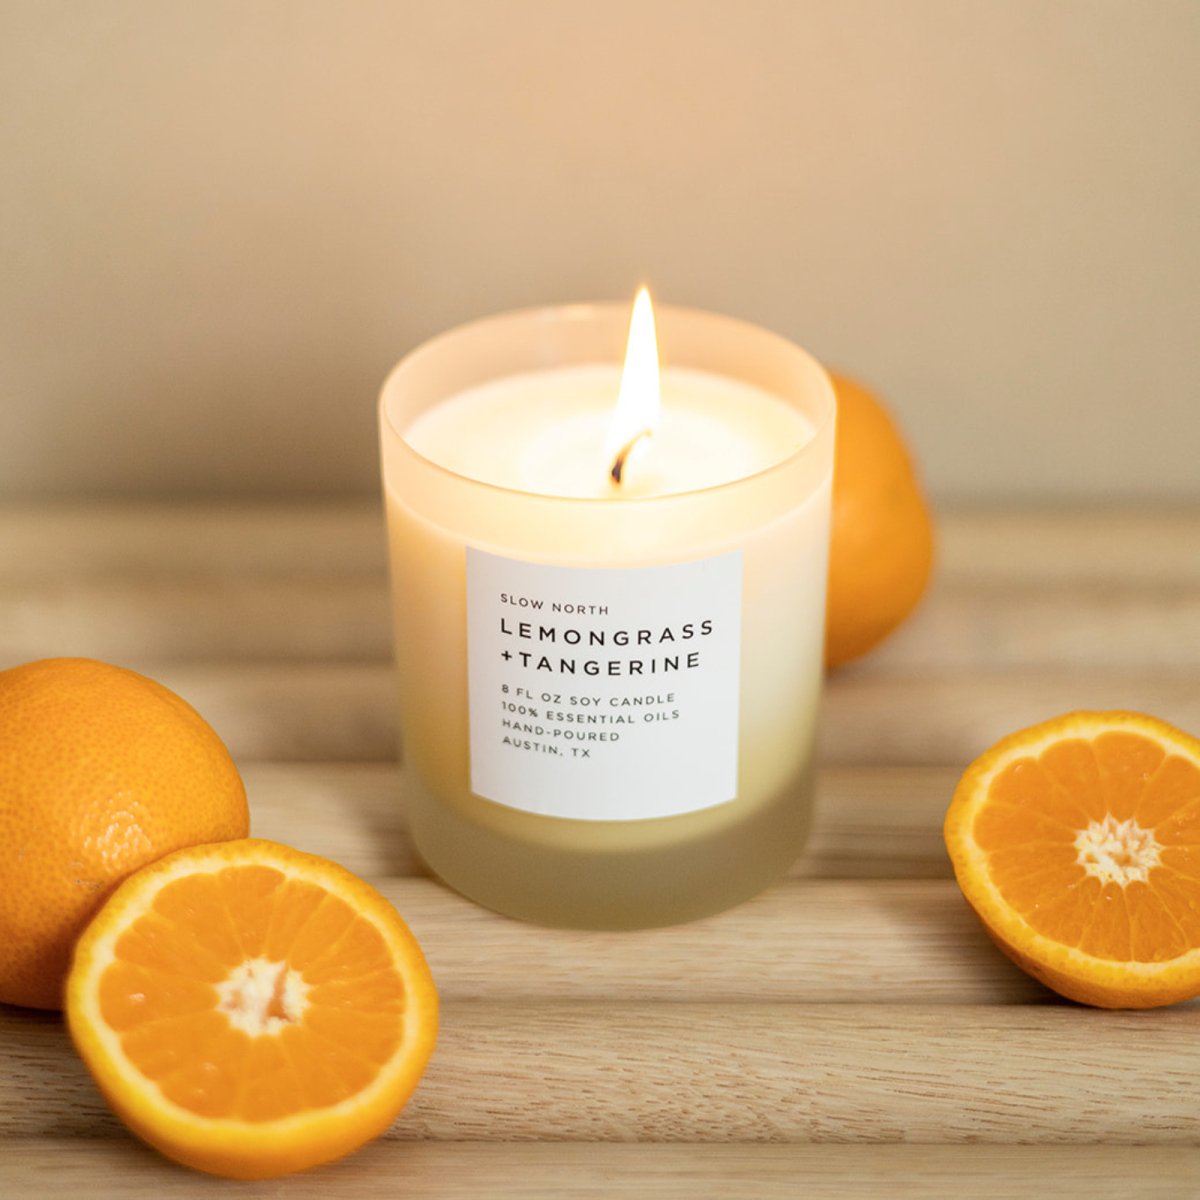 Slow North Lemongrass + Tangerine Frosted Candle, 8 oz - lily & onyx